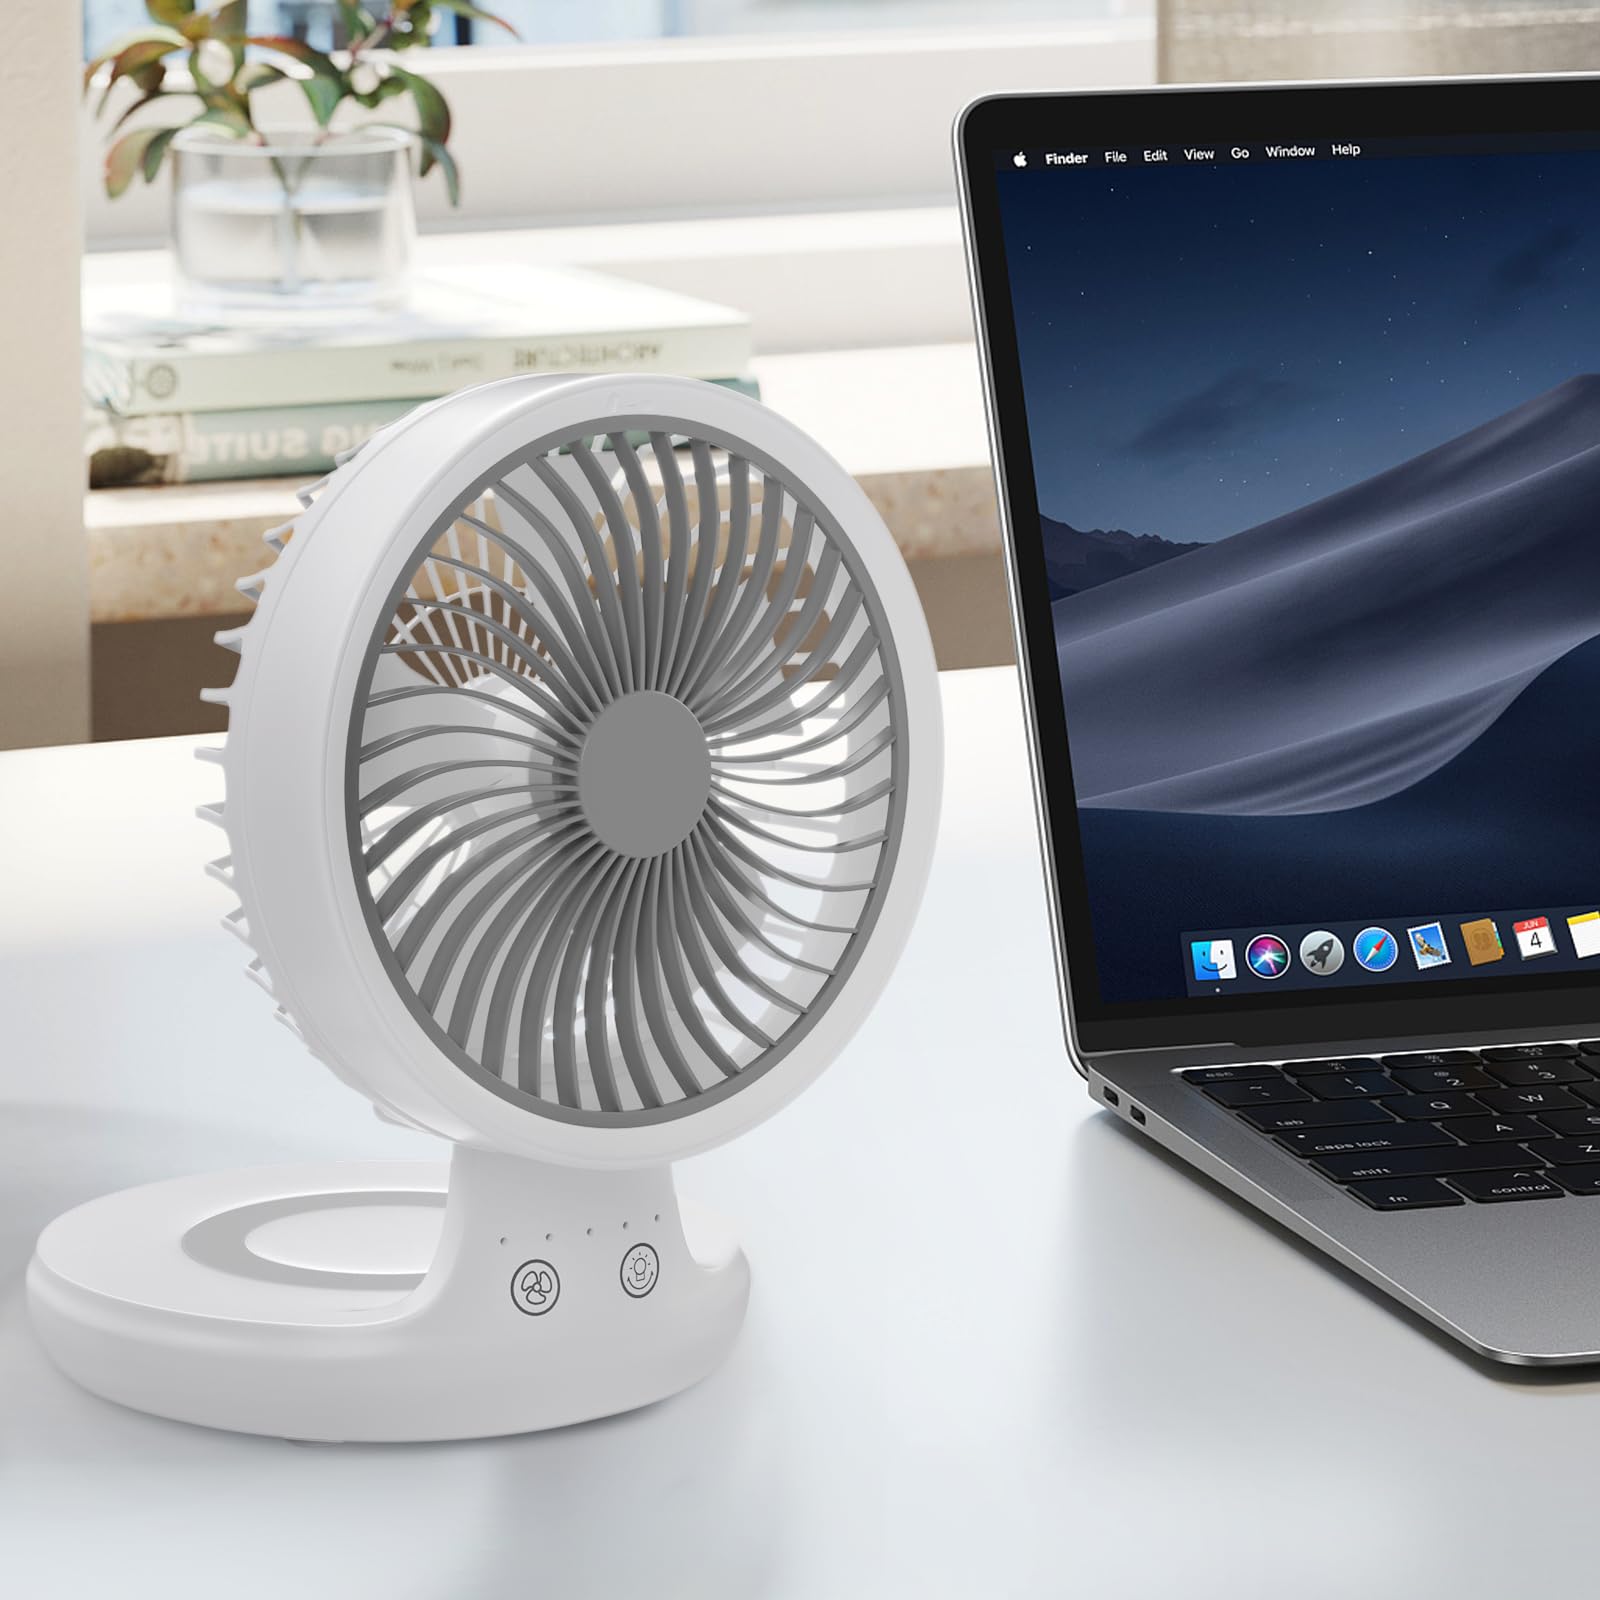 mollie 8-Inch Small Rechargeable USB Desk Fan Battery Operated with Speeds for Home Office Bedroom Mini Portable Personal Quiet Desktop Air Circulator Foldable Cooling Oscillating Table Fan